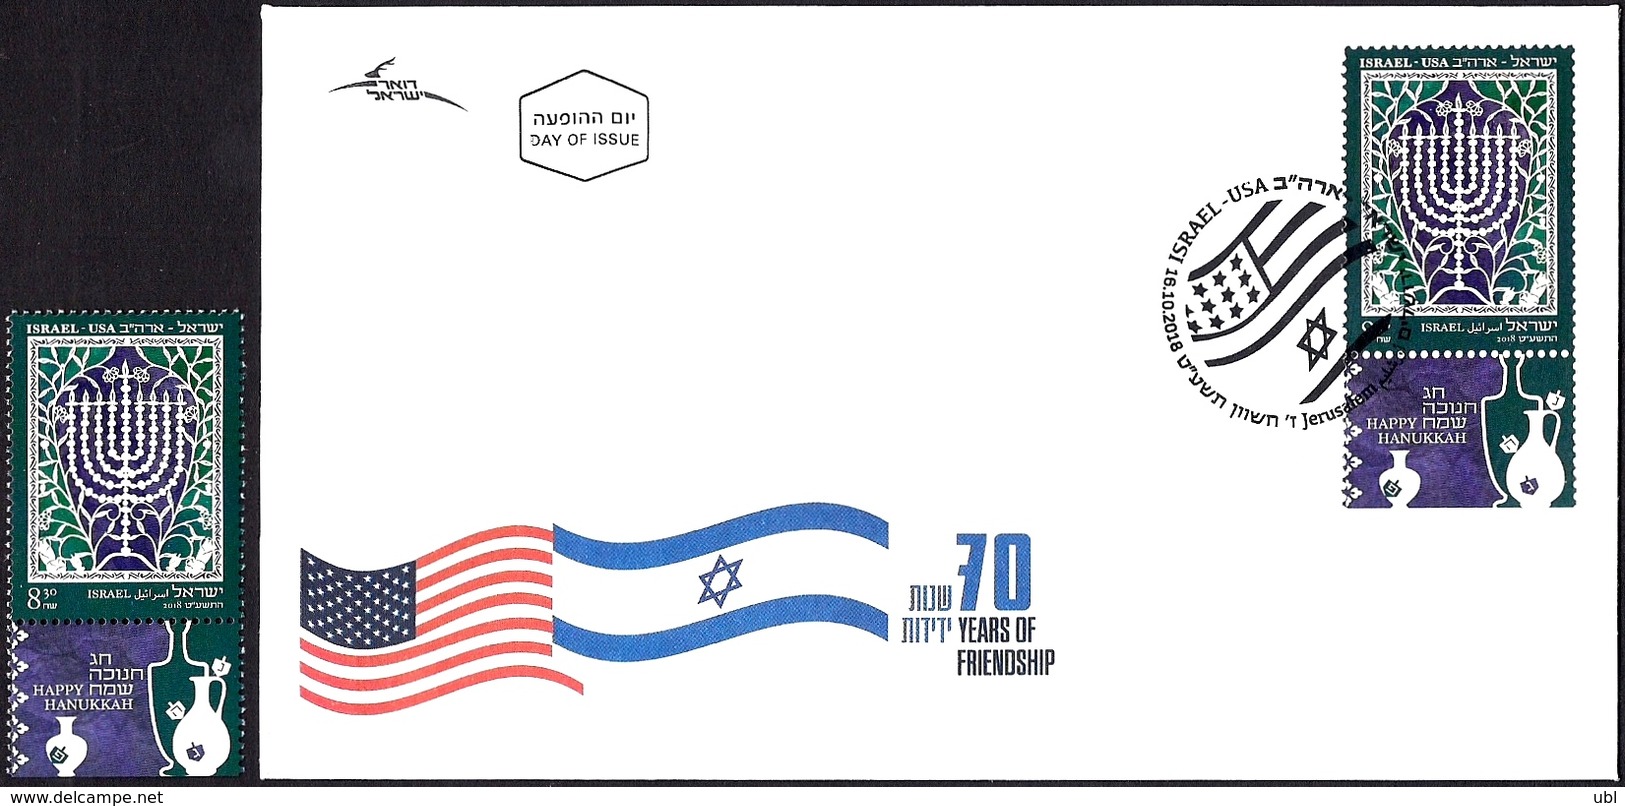 ISRAEL 2018 - Joint Issue With The USA - The Hanukkah Eight-Candles Candelabra - A Stamp With A Tab - MNH & FDC - Guidaismo